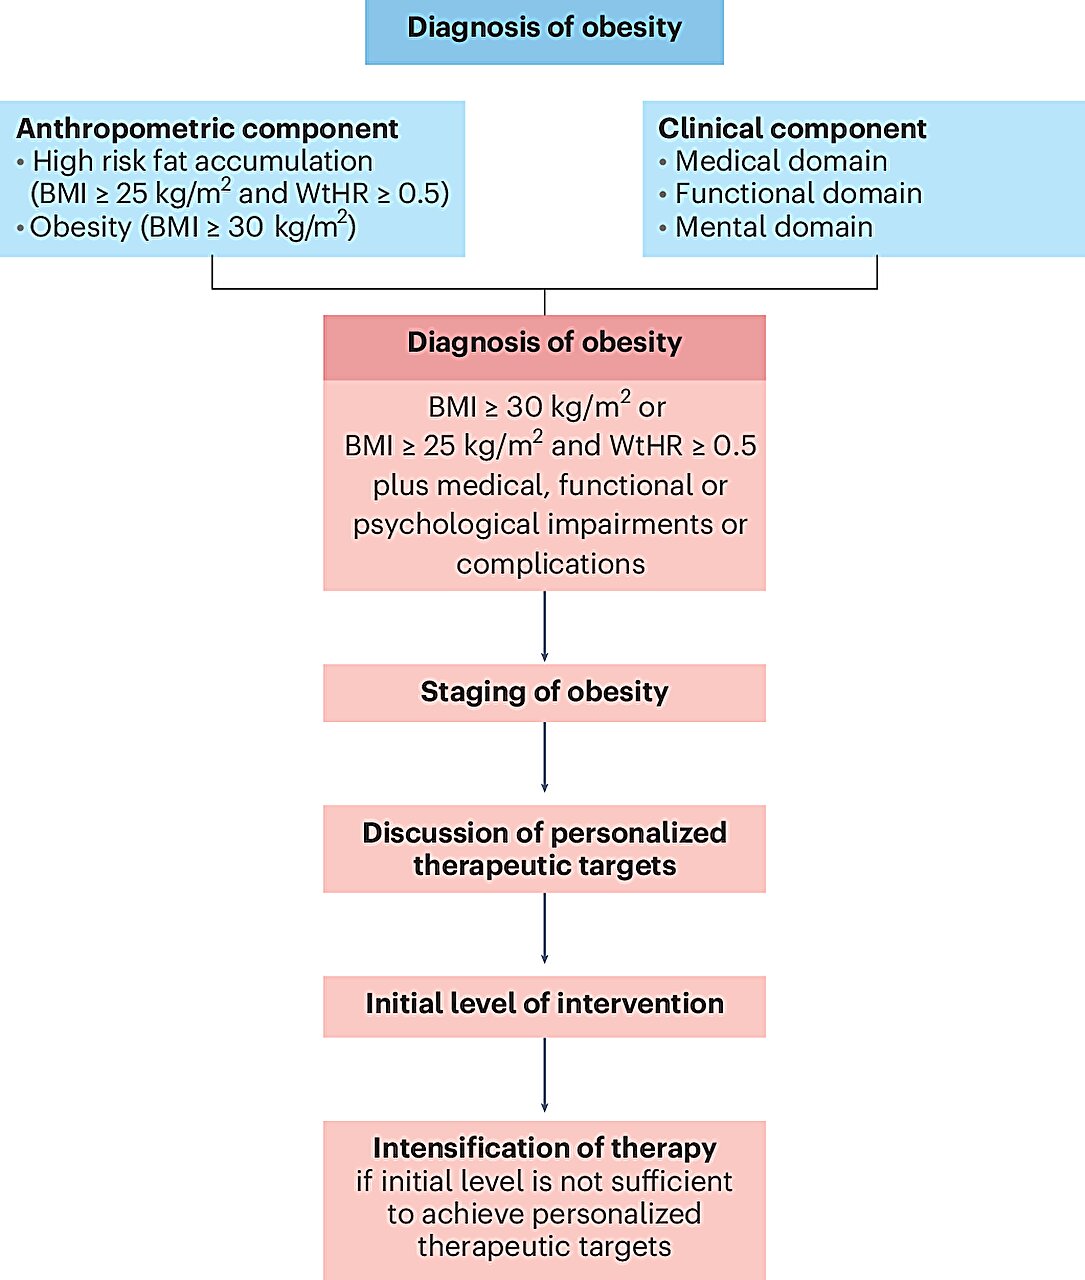 Researchers propose new framework for diagnosing obesity based on body fat distribution, not BMI